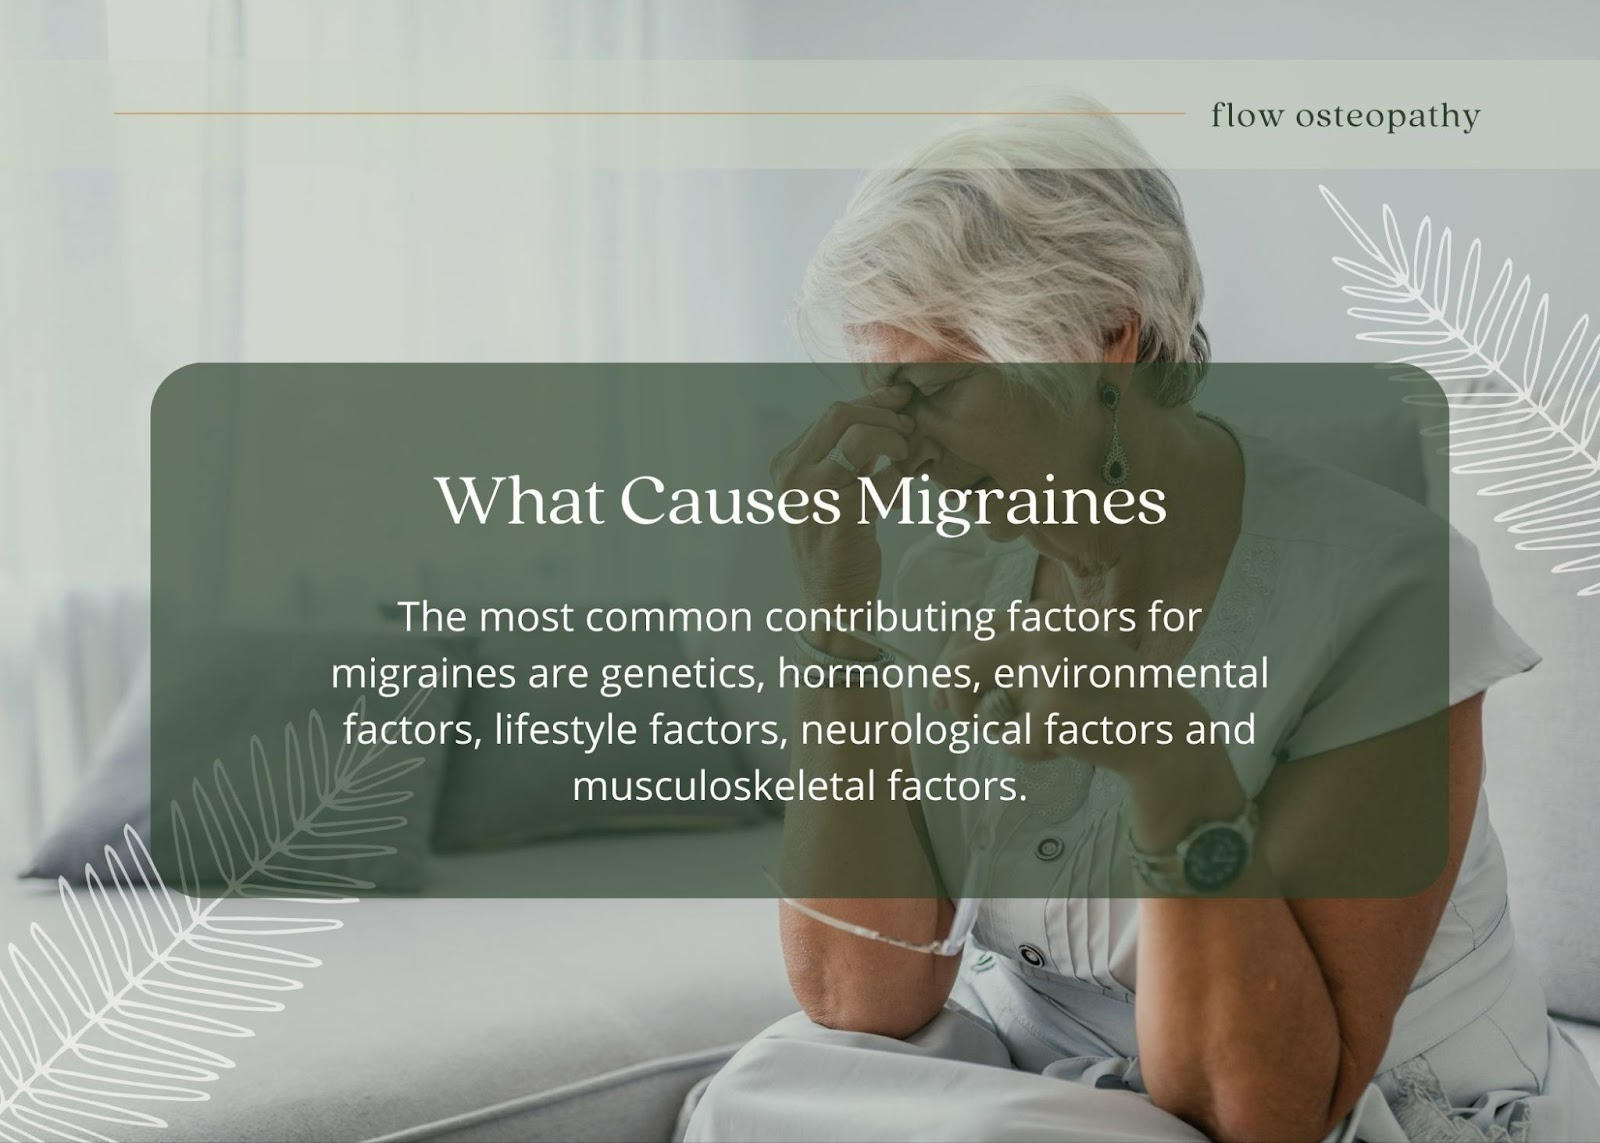 What Causes Migraines? | Flow Osteopathy & Headache Clinic